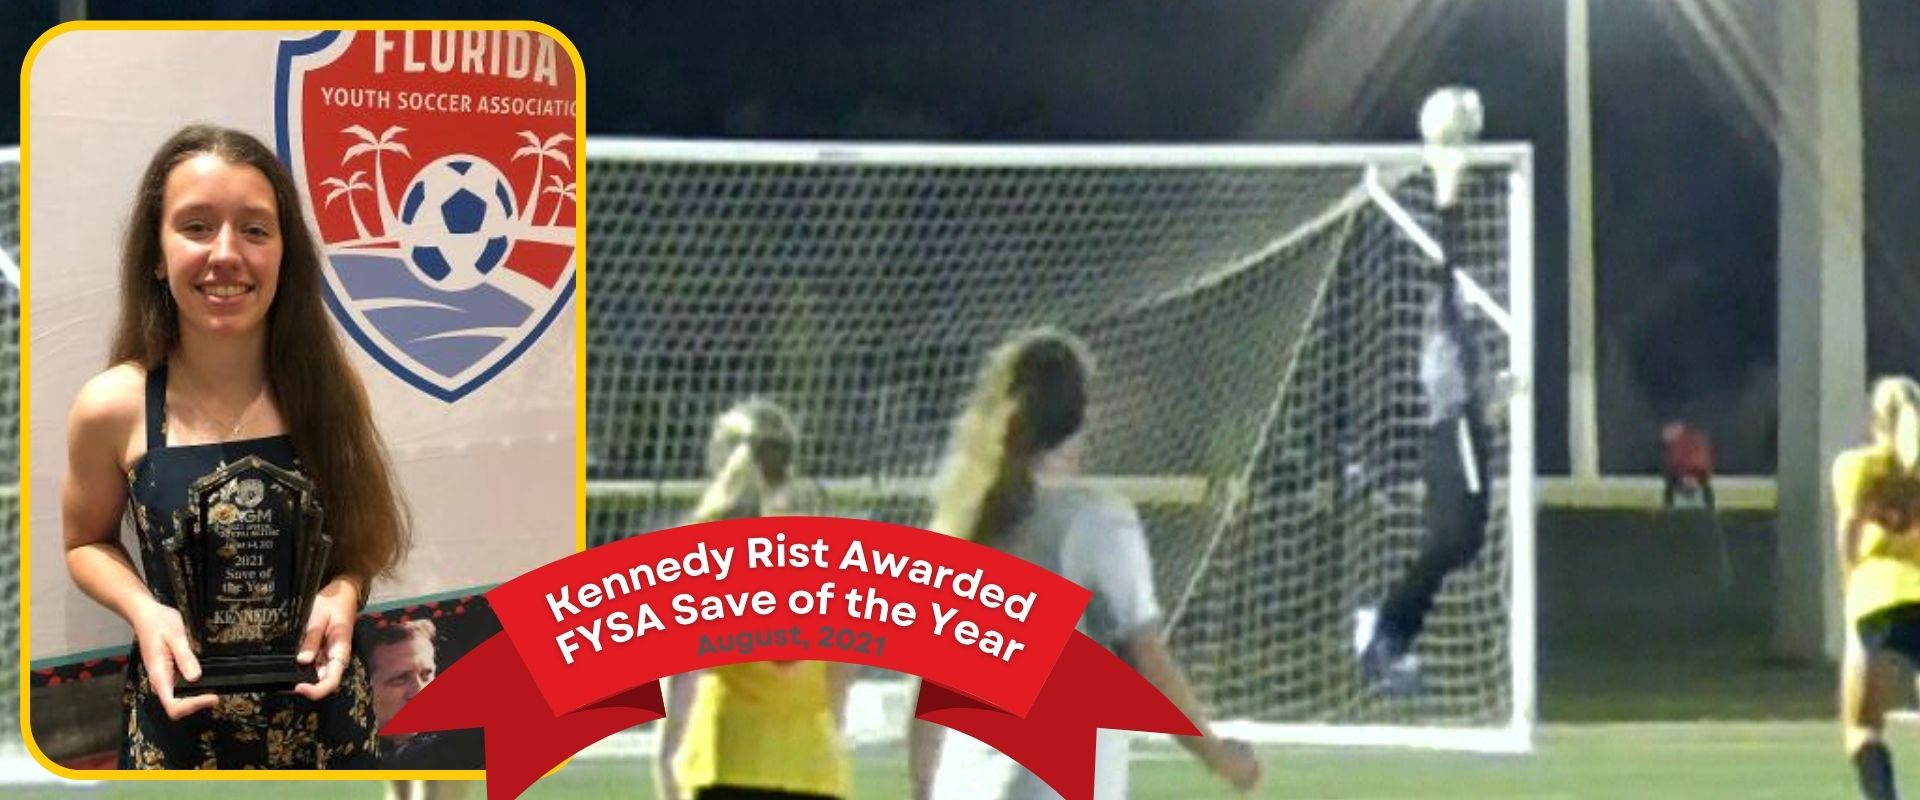 Rist Awarded FYSA Save of the Year